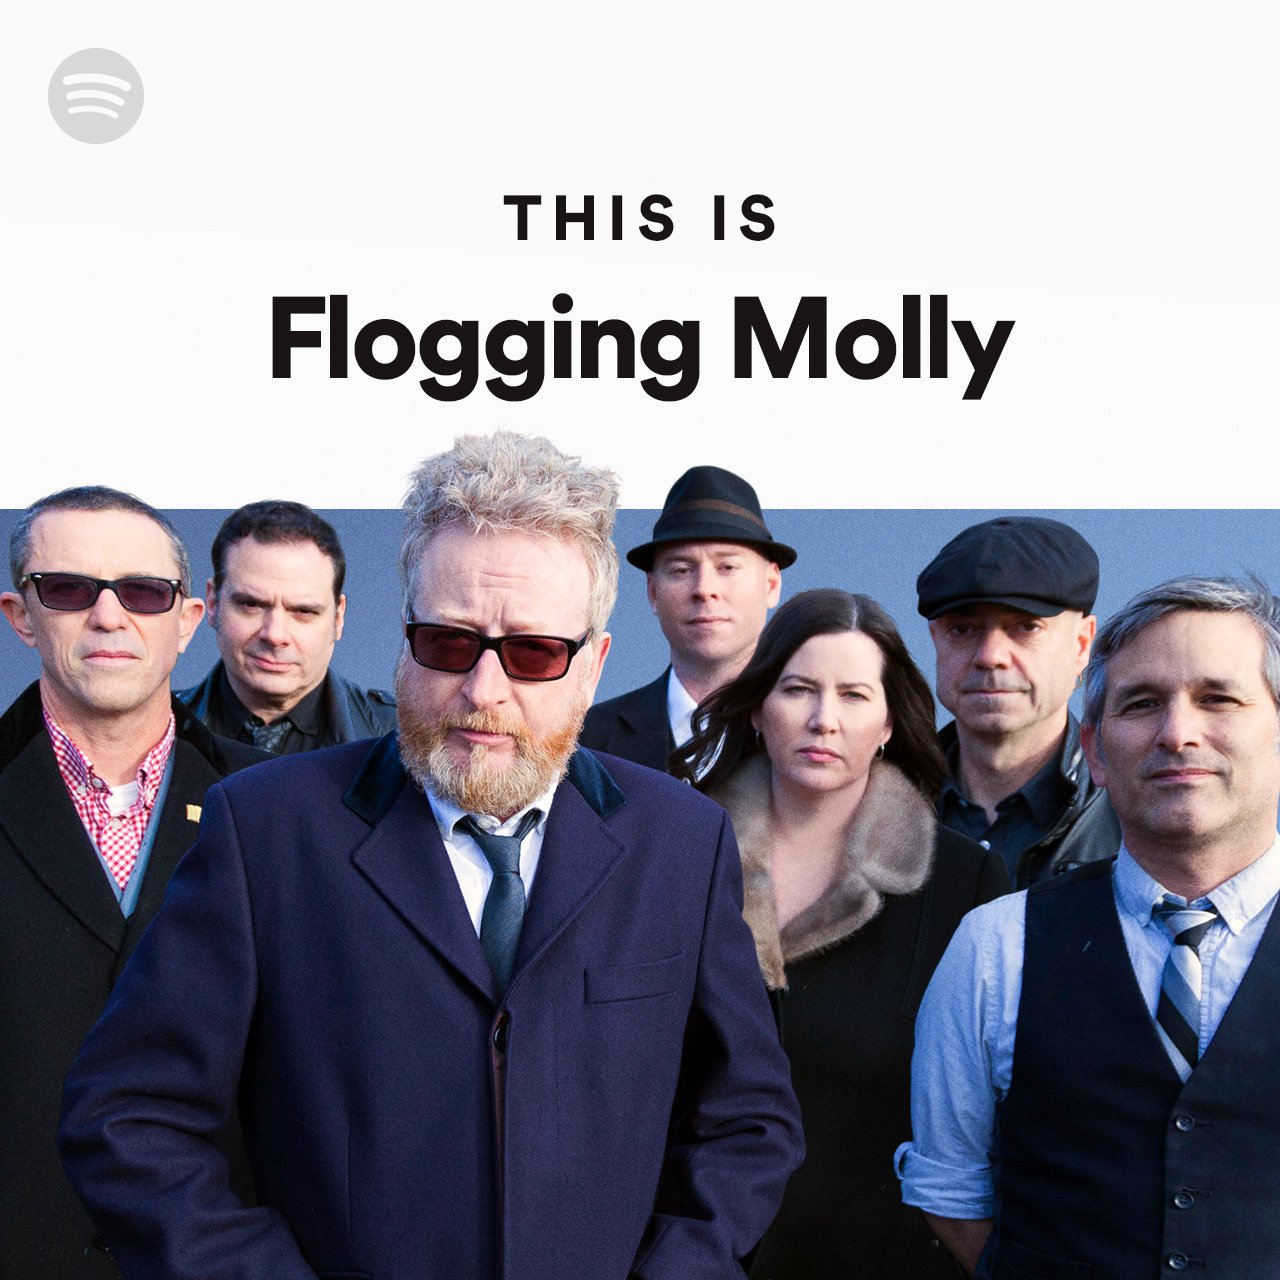 Flogging Mollyさんのツイート Get Prepped For St Patrick S Day With Spotify S This Is Flogging Molly Playlist Here T Co Thmwgbnupx